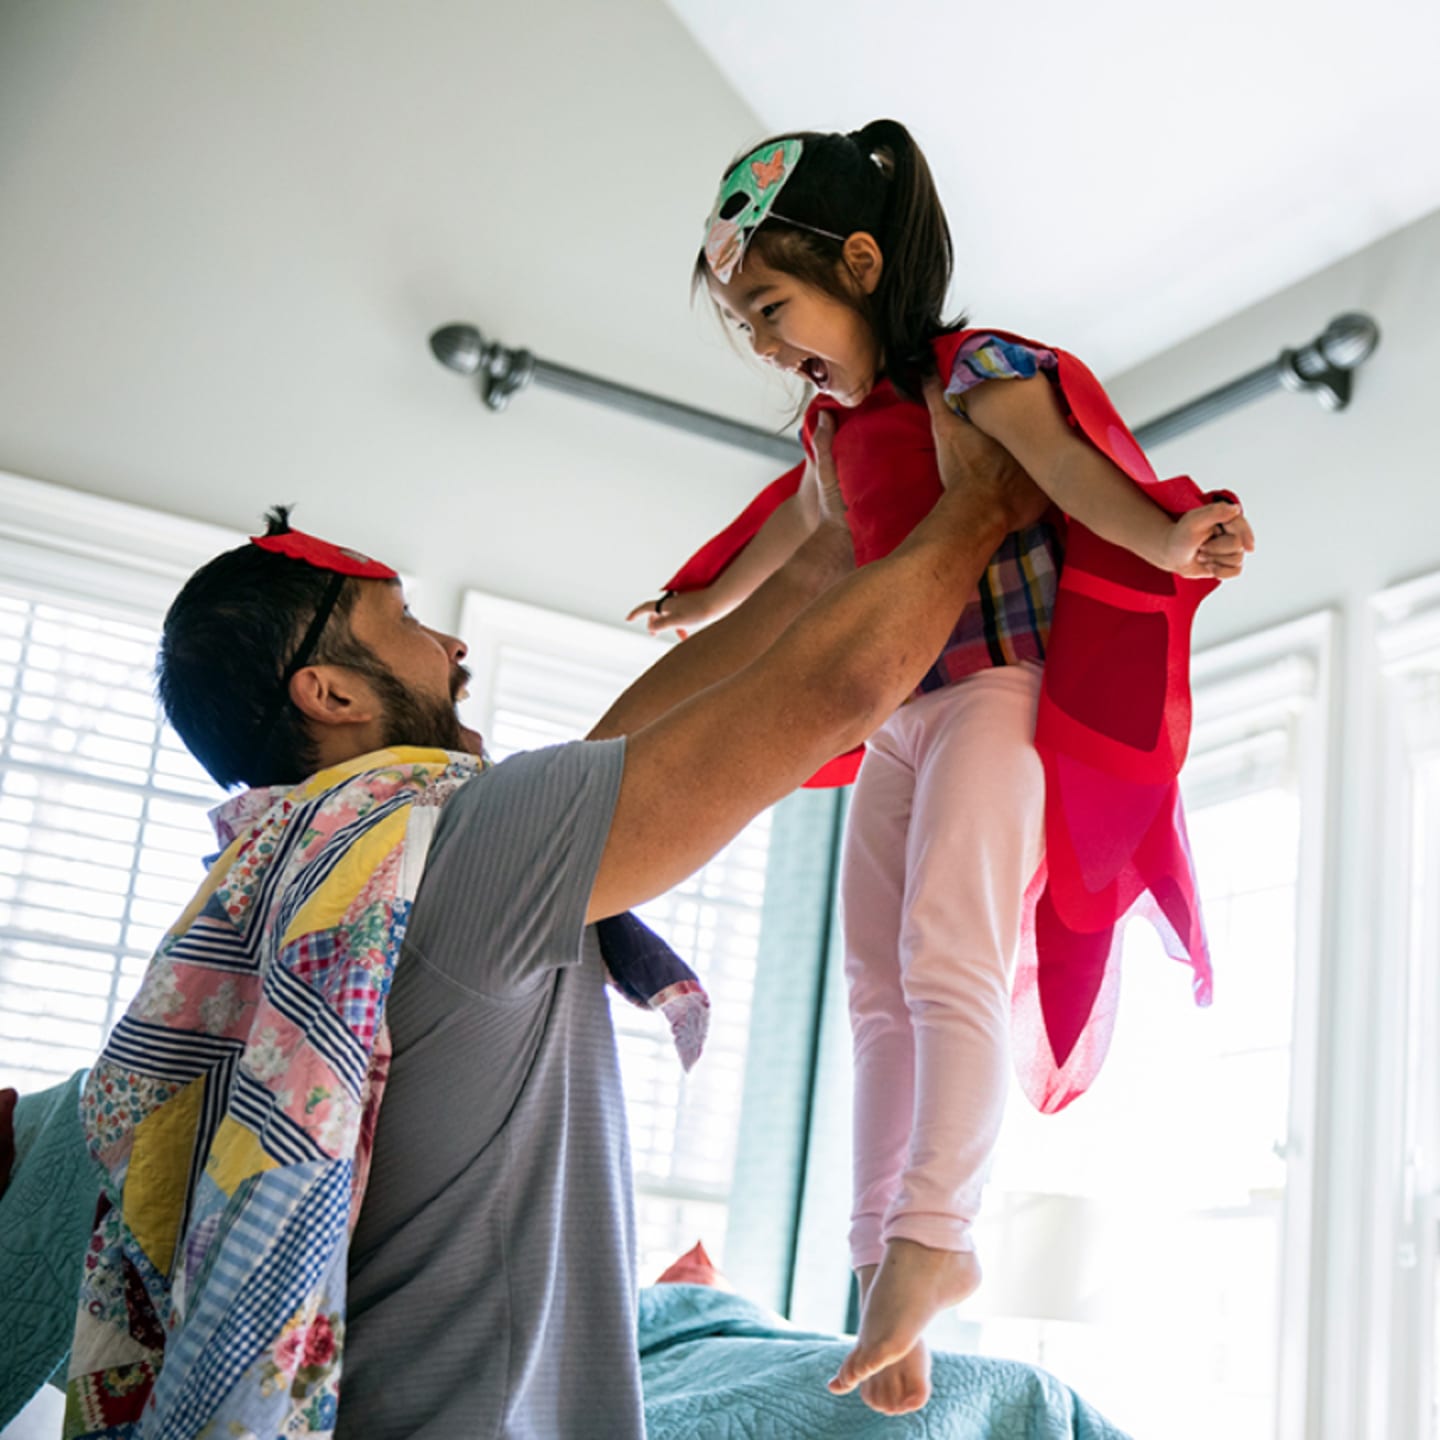 Father playing dress-up with young daughter.